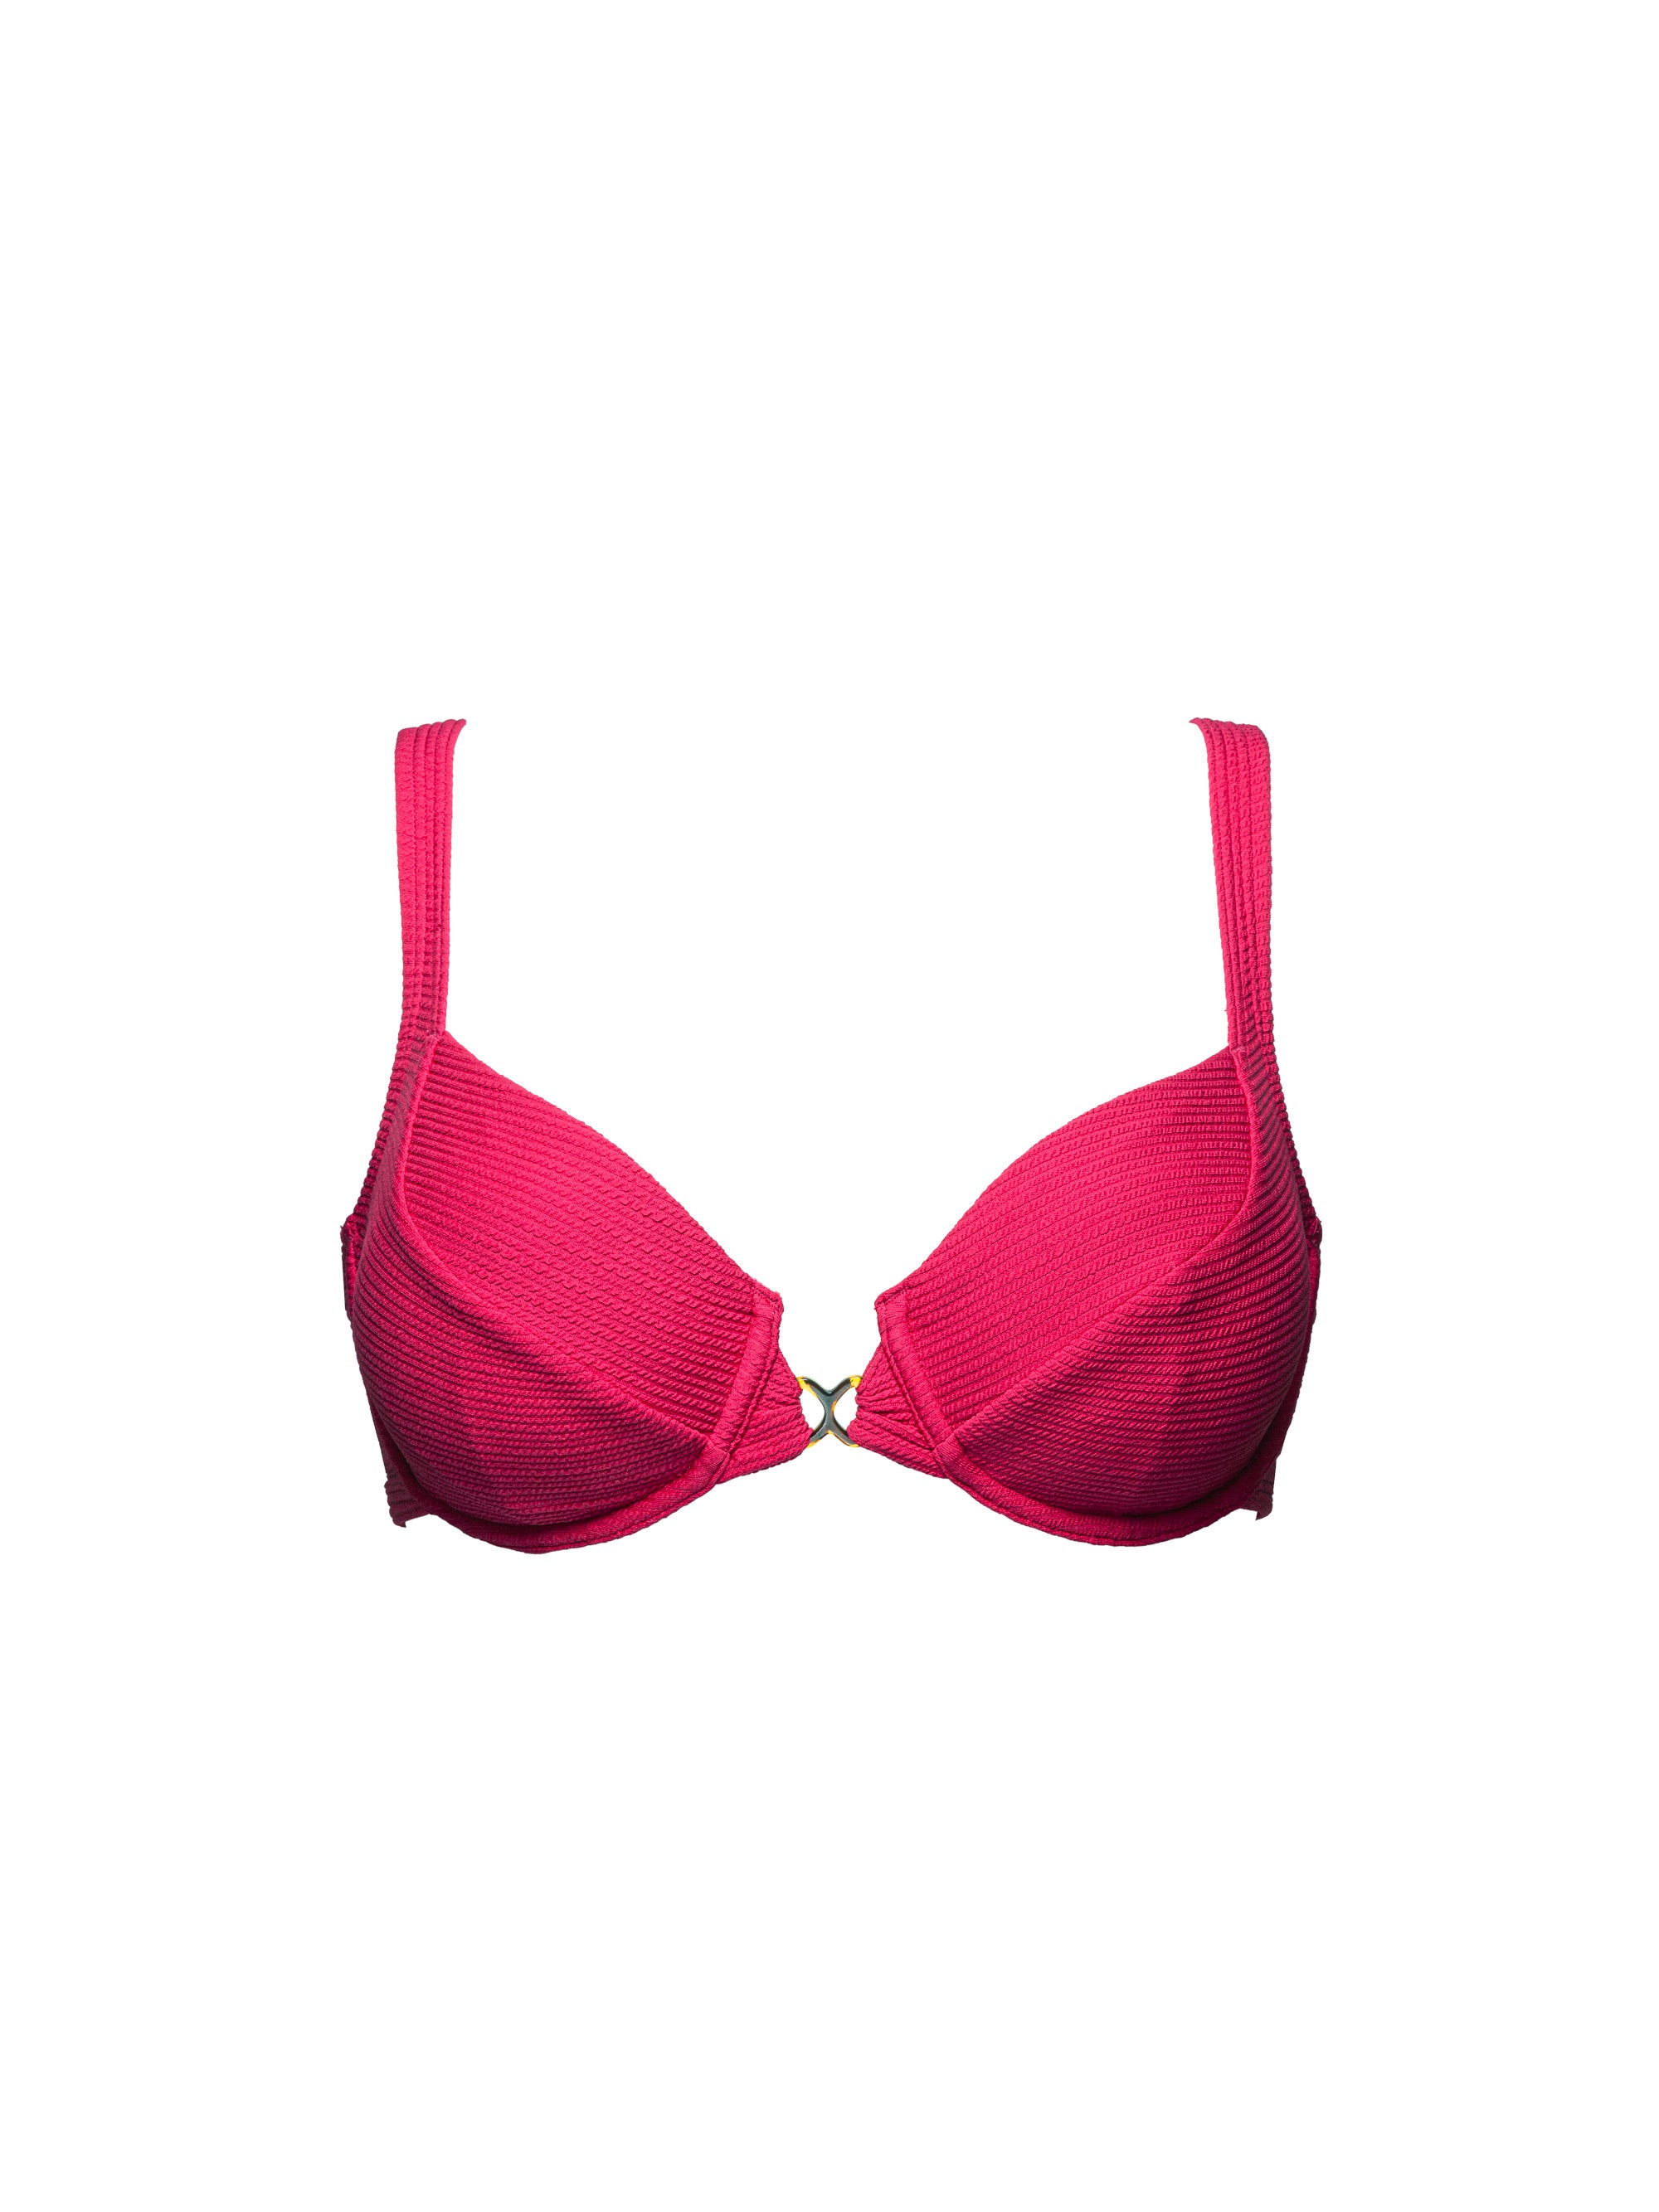 Underwired swimsuit top Glamorous Textured Cerise